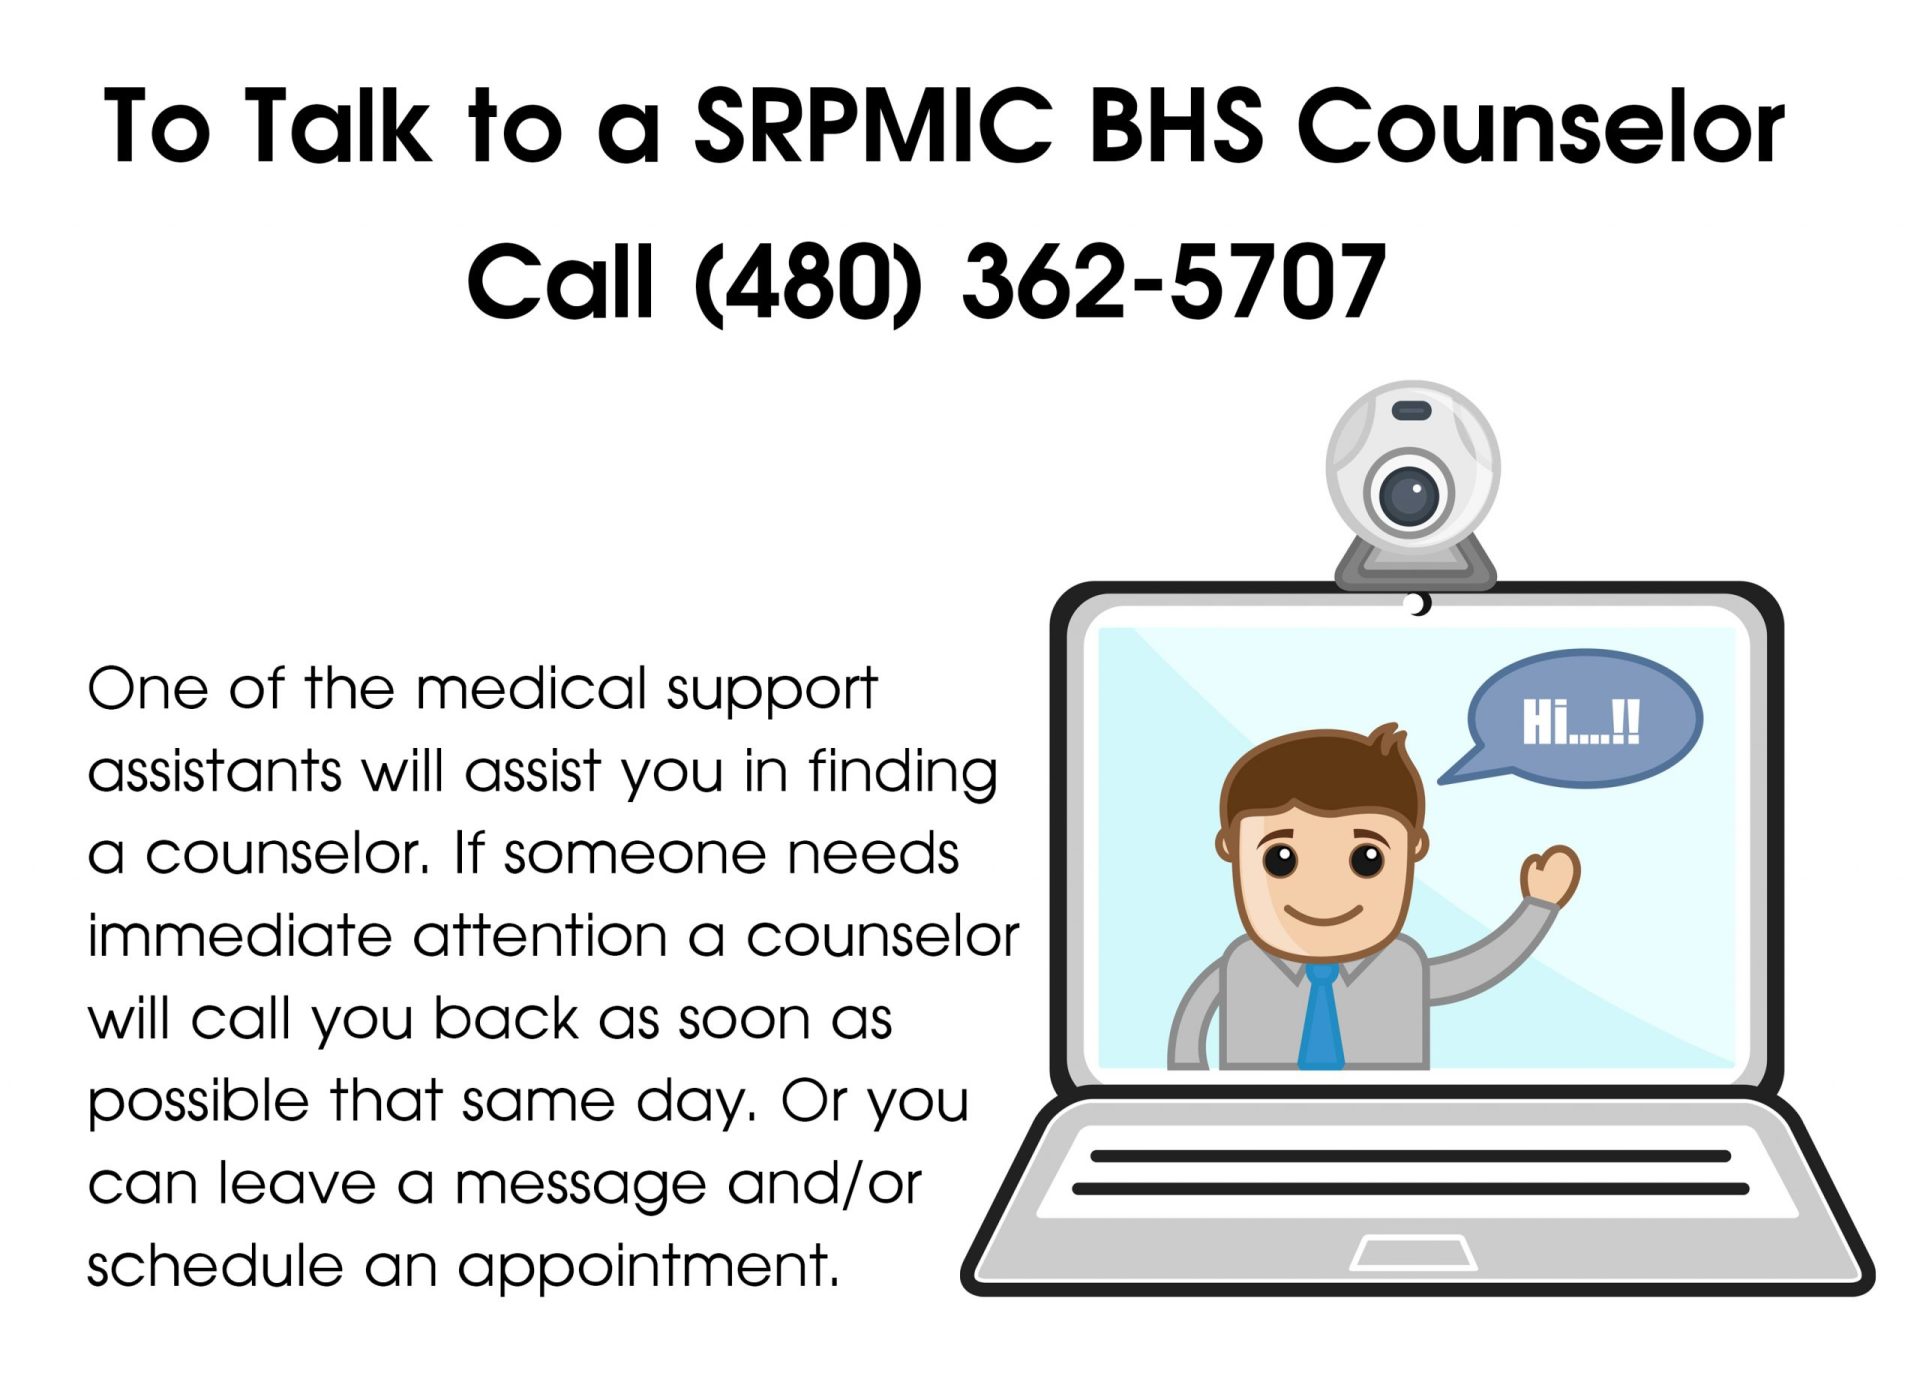 Behavioral Health Services Offering Telehealth Counseling Sessions